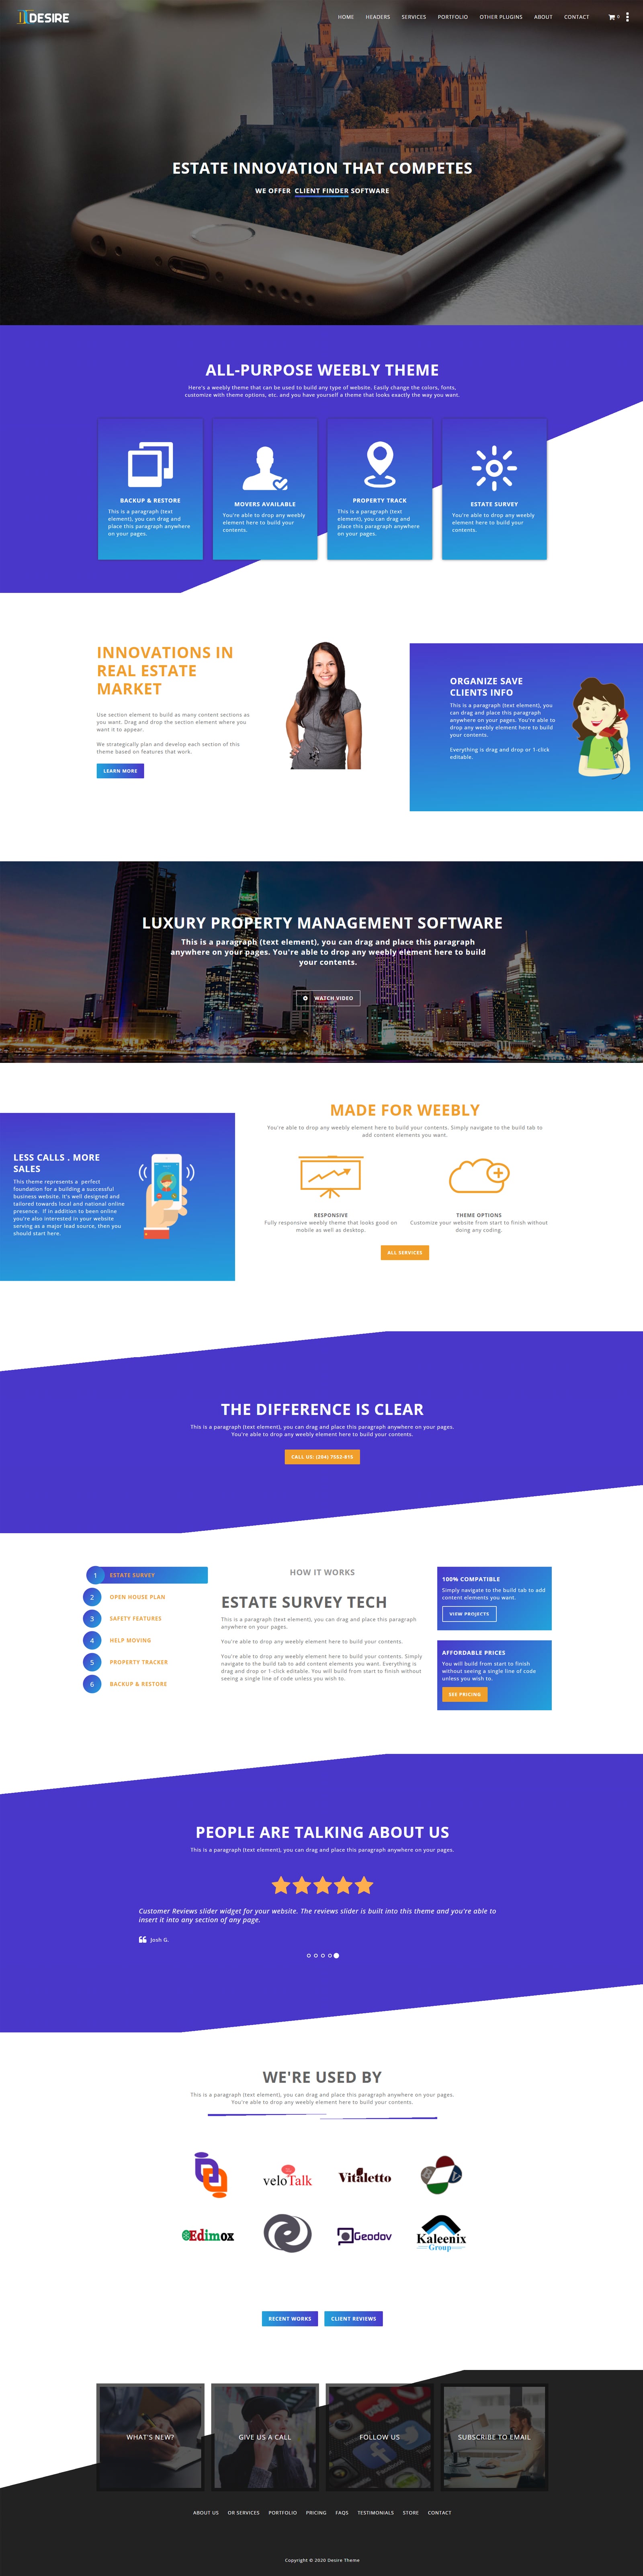 Desire weebly themes for business websites